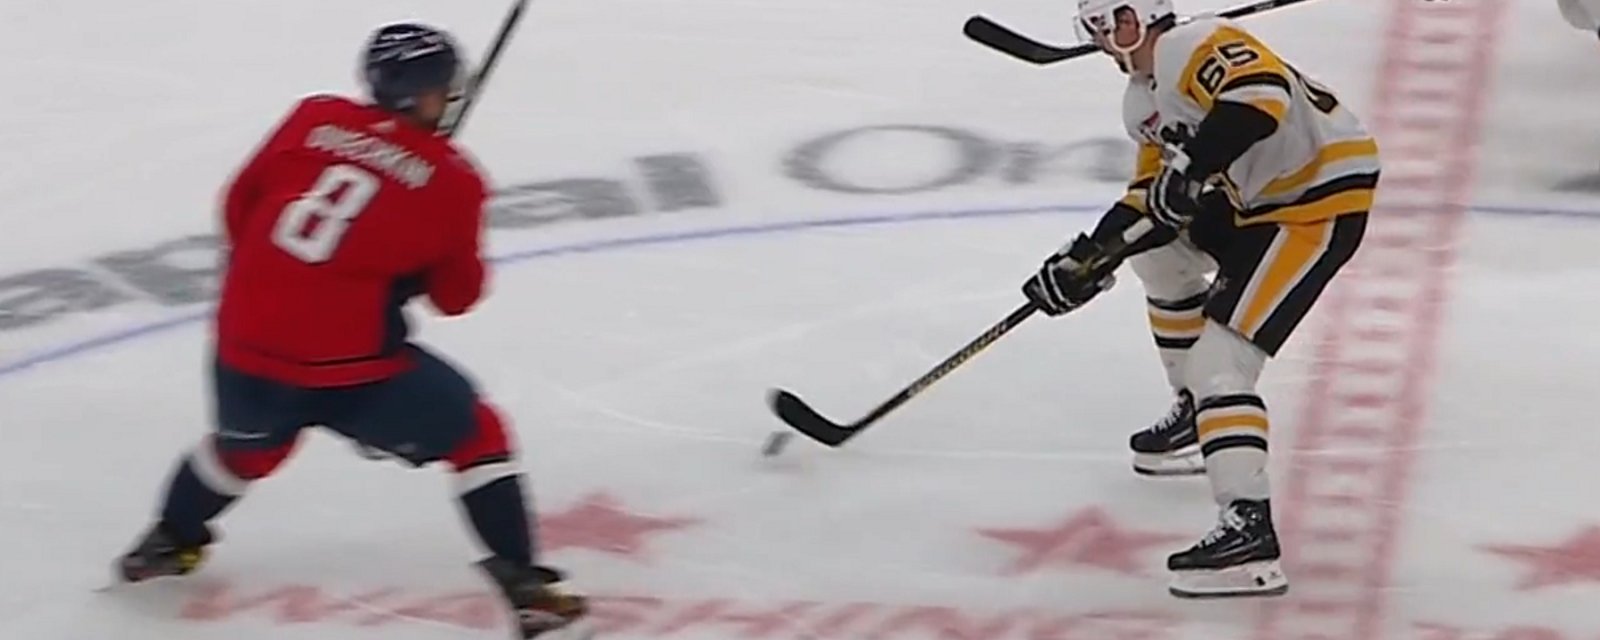 Ovechkin welcomes Karlsson to the rivalry with a huge hit.